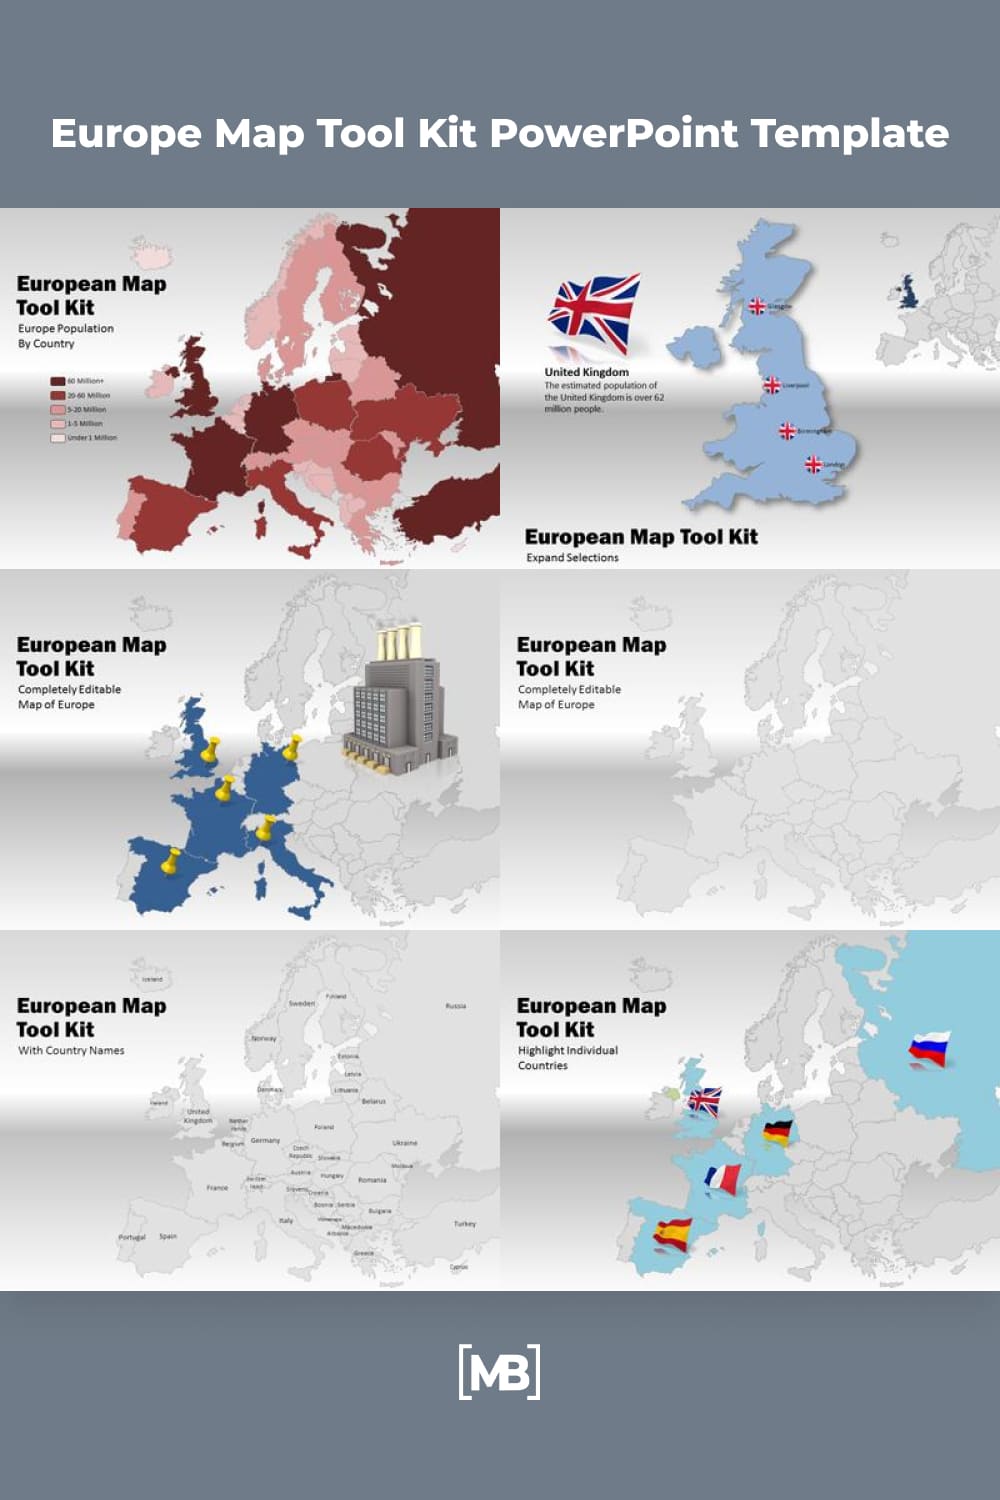 Europe map tool kit powerpoint template.